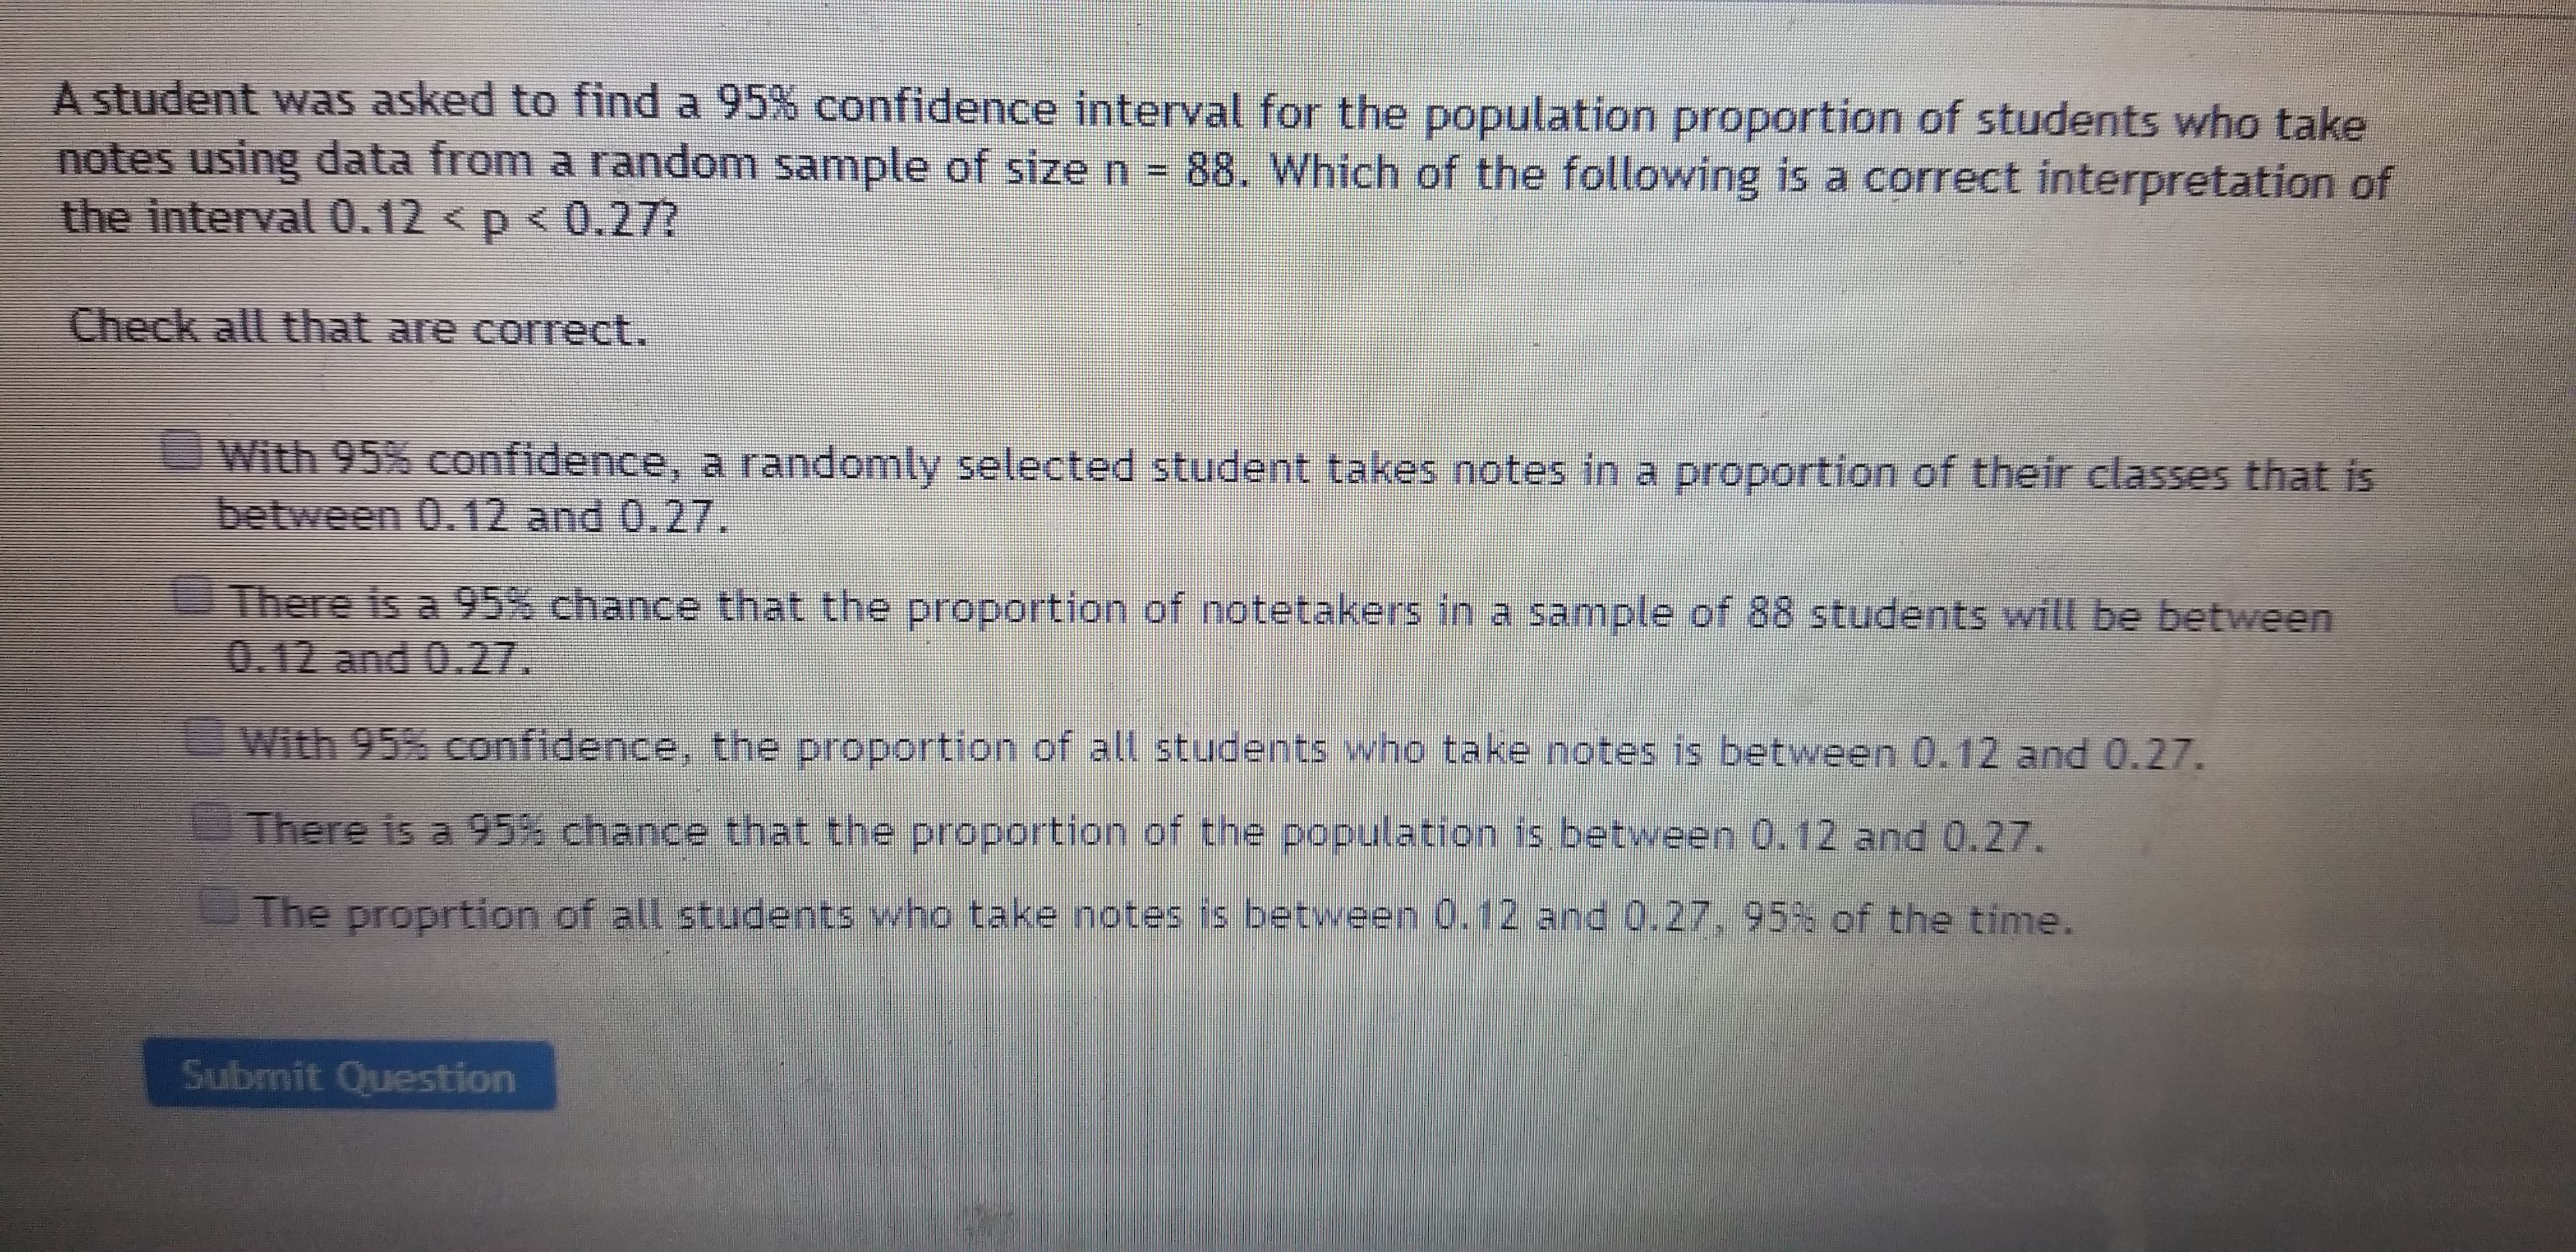 A student was asked to find a 95% confidence interval for the population proportion of students who take
notes using data from a random sample of size n = 88. Which of the following is a correct interpretation of
the interval 0.12 < p < 0.27?
Check all that are correct.
With 95% confidence, a randomly selected student takes notes in a proportion of their classes that is
between 0.12 and 0.27.
There is a 95% chance that the proportion of notetakers in a sample of 88 students will be between
0.12 and 0.27.
With 95% confidence, the proportion of all students who take notes is between 0.12 and 0.27.
There is a 95% chance that the proportion of the population is between 0.12 and 0.27.
The proprtion of all students who take notes is between 0.12 and 0.27, 95% of the time.
Submit Question
